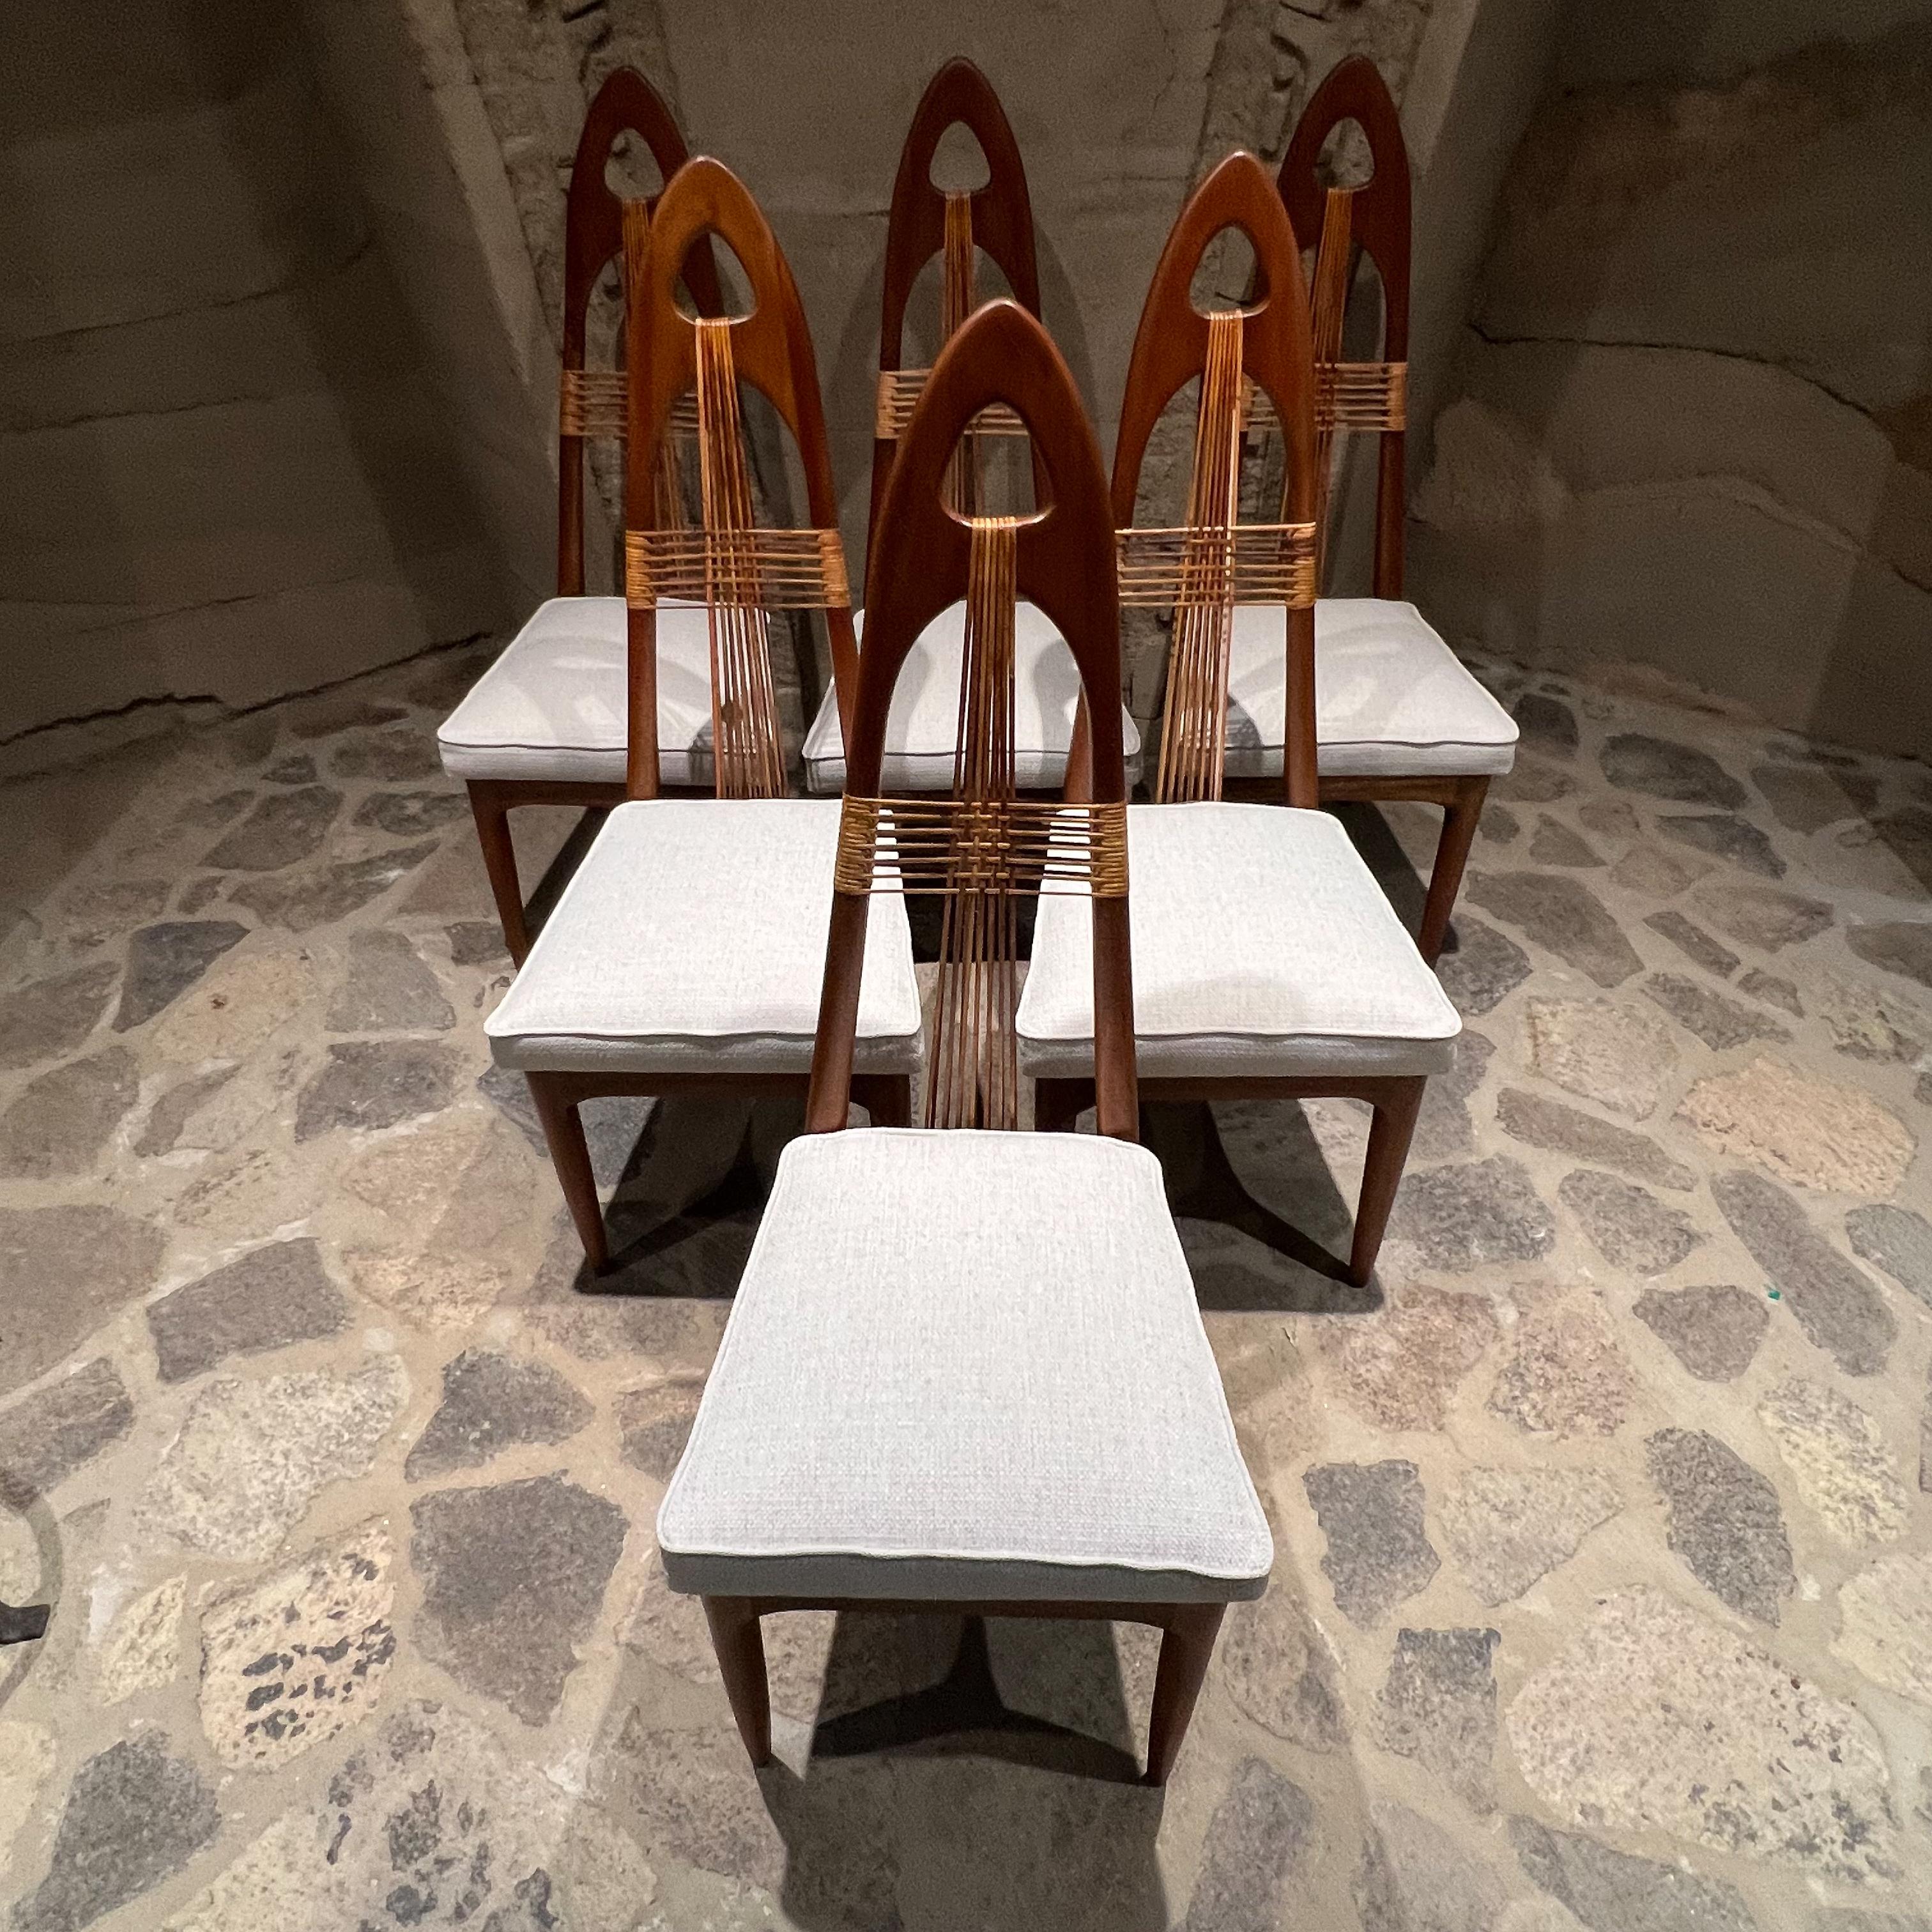 1950s Mexico Six Spectacular Modern Gothic Cross Dining Chairs Mahogany and Cane For Sale 3